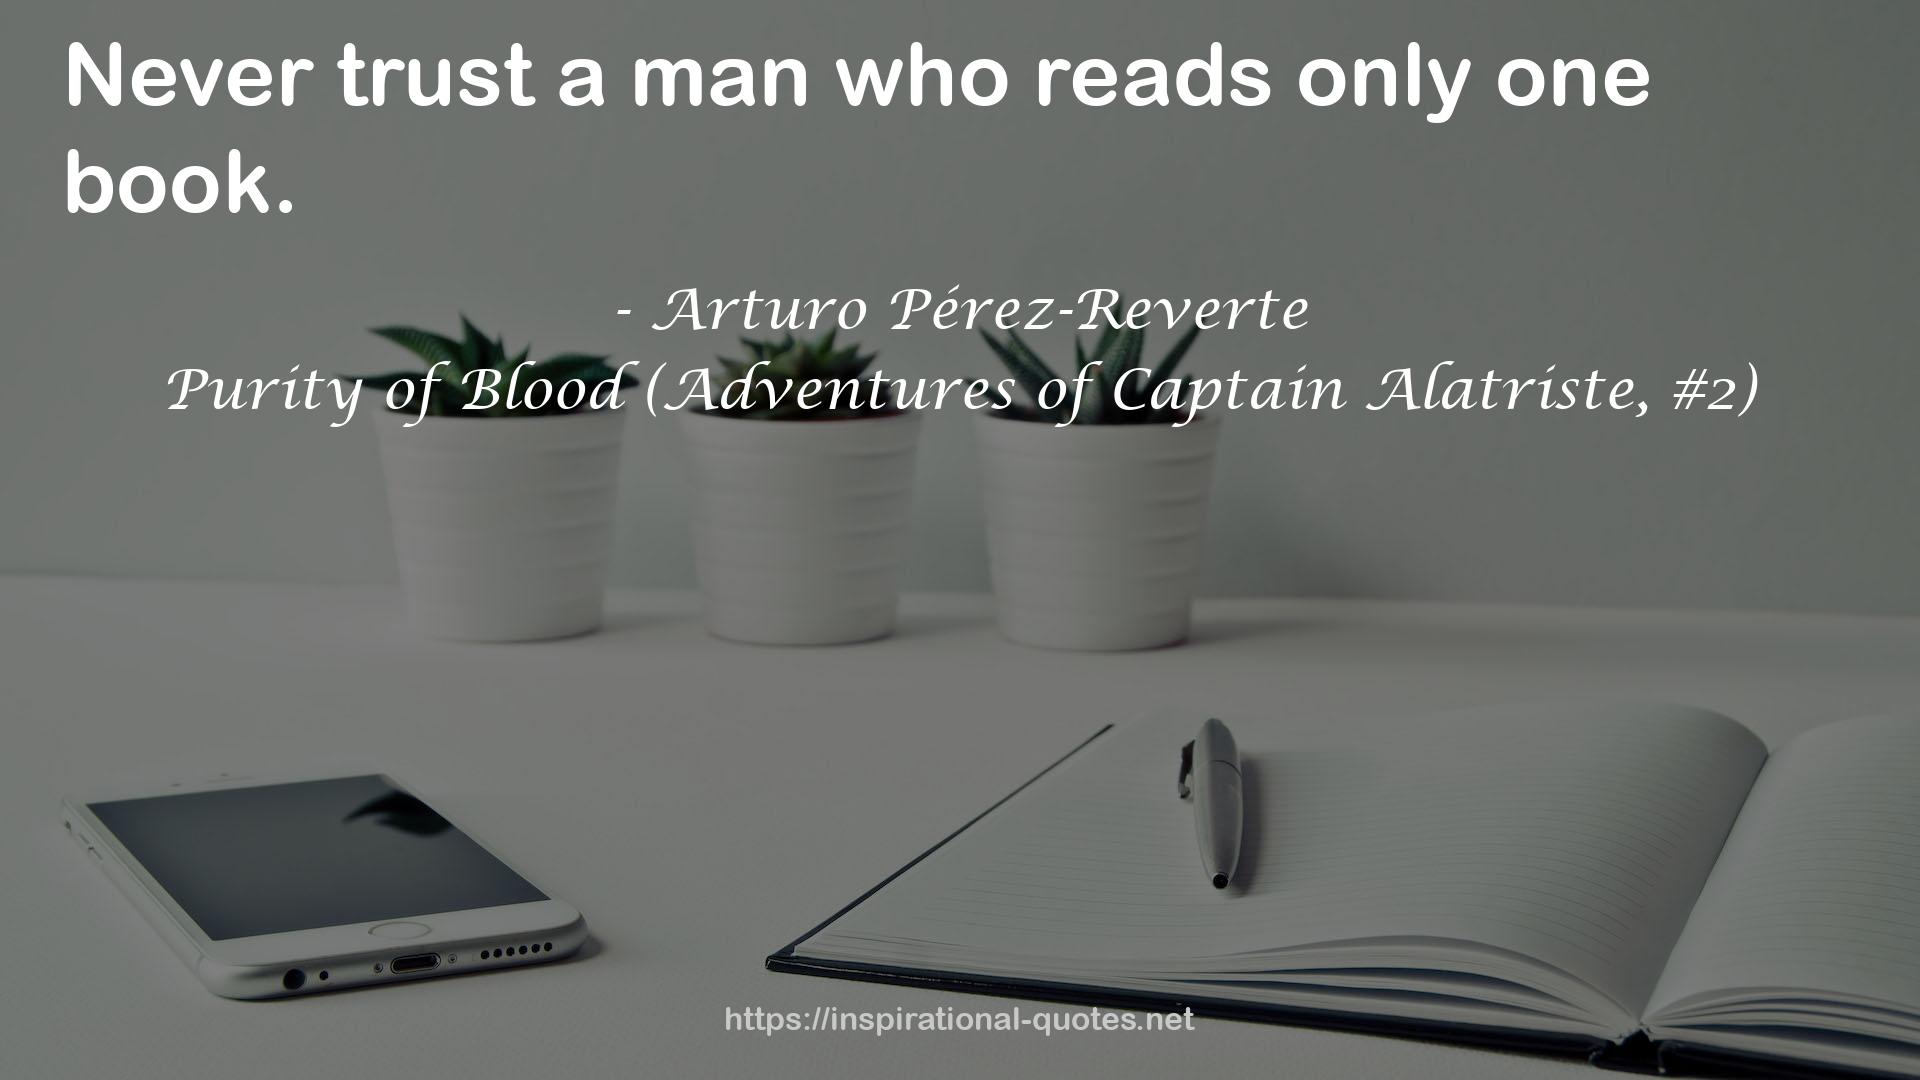 Purity of Blood (Adventures of Captain Alatriste, #2) QUOTES